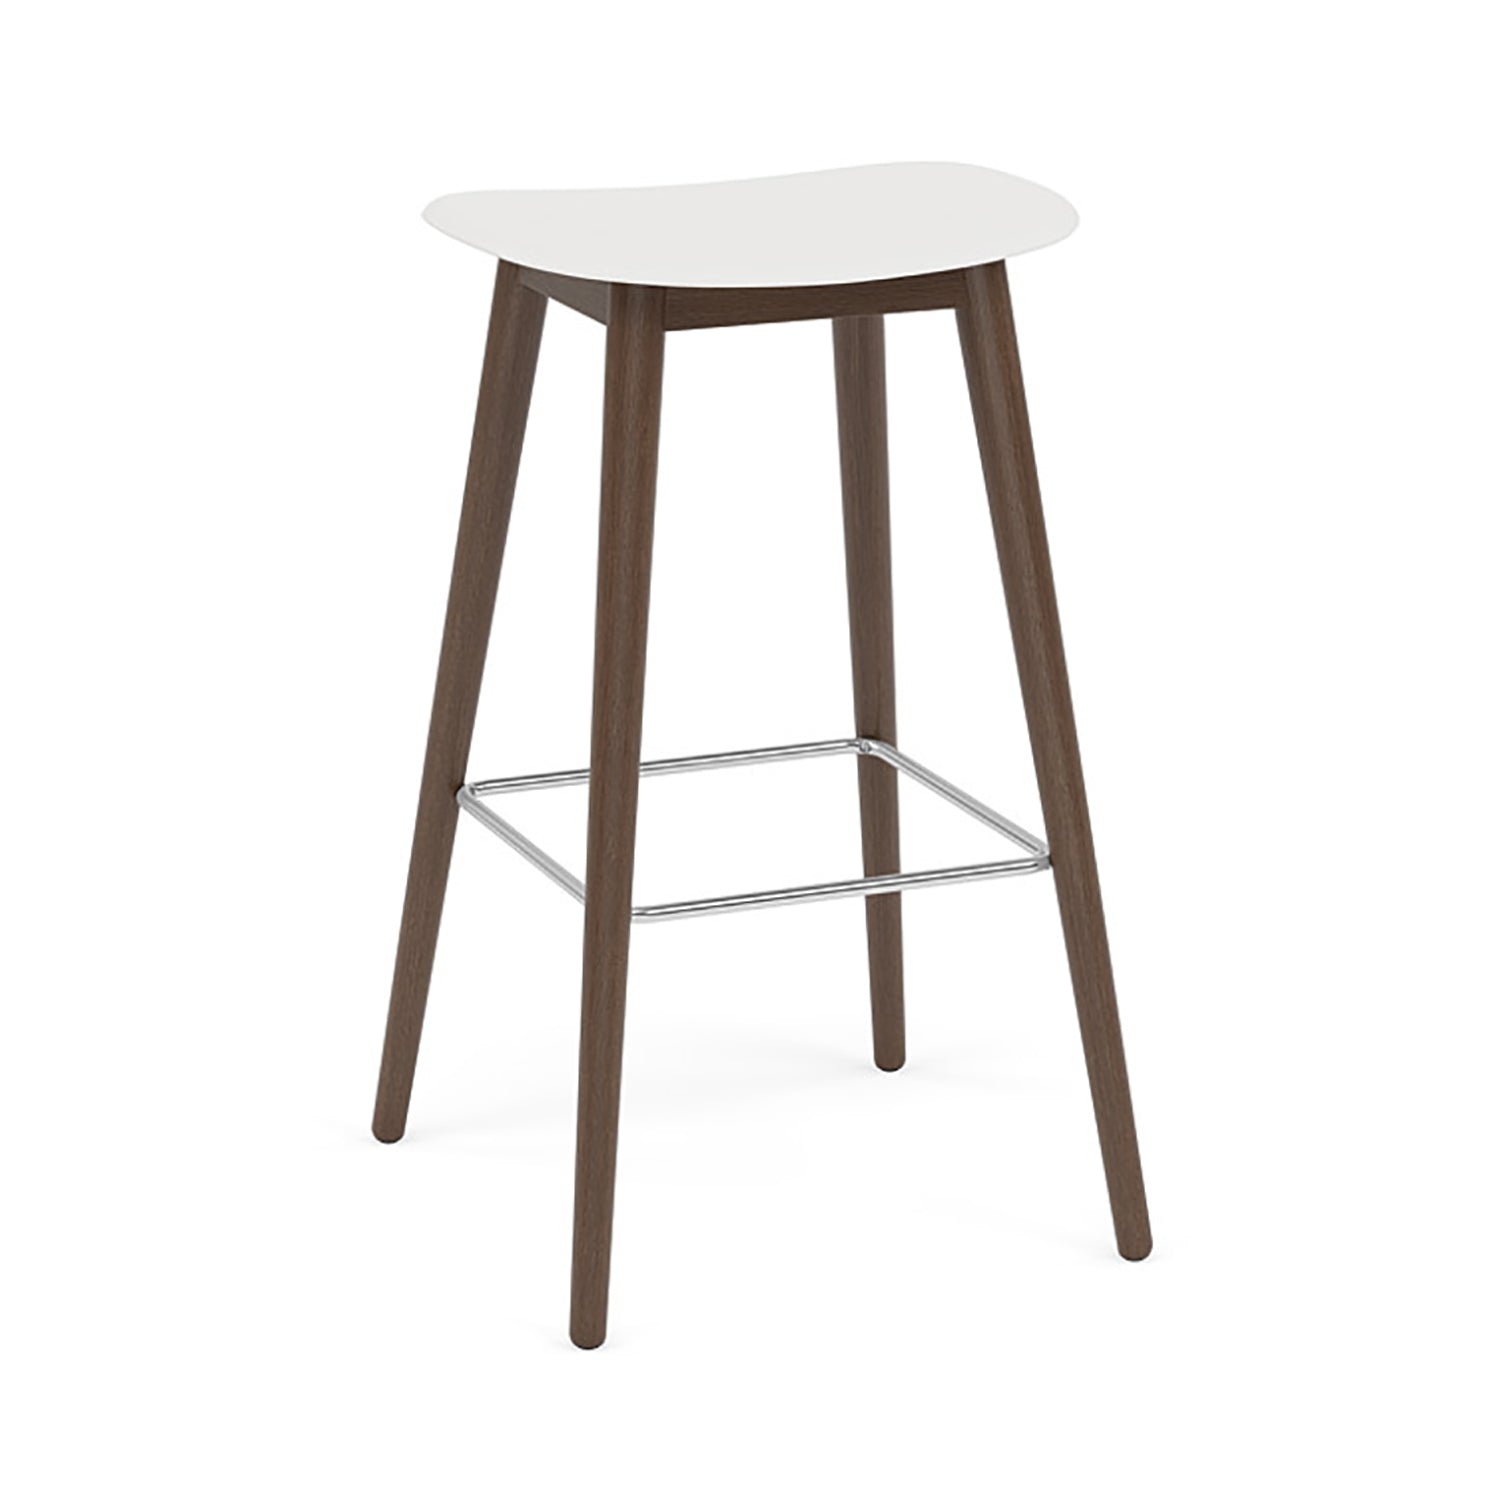 Fiber Bar + Counter Stool: Wood Base + Bar + Stained Dark Brown + Natural White